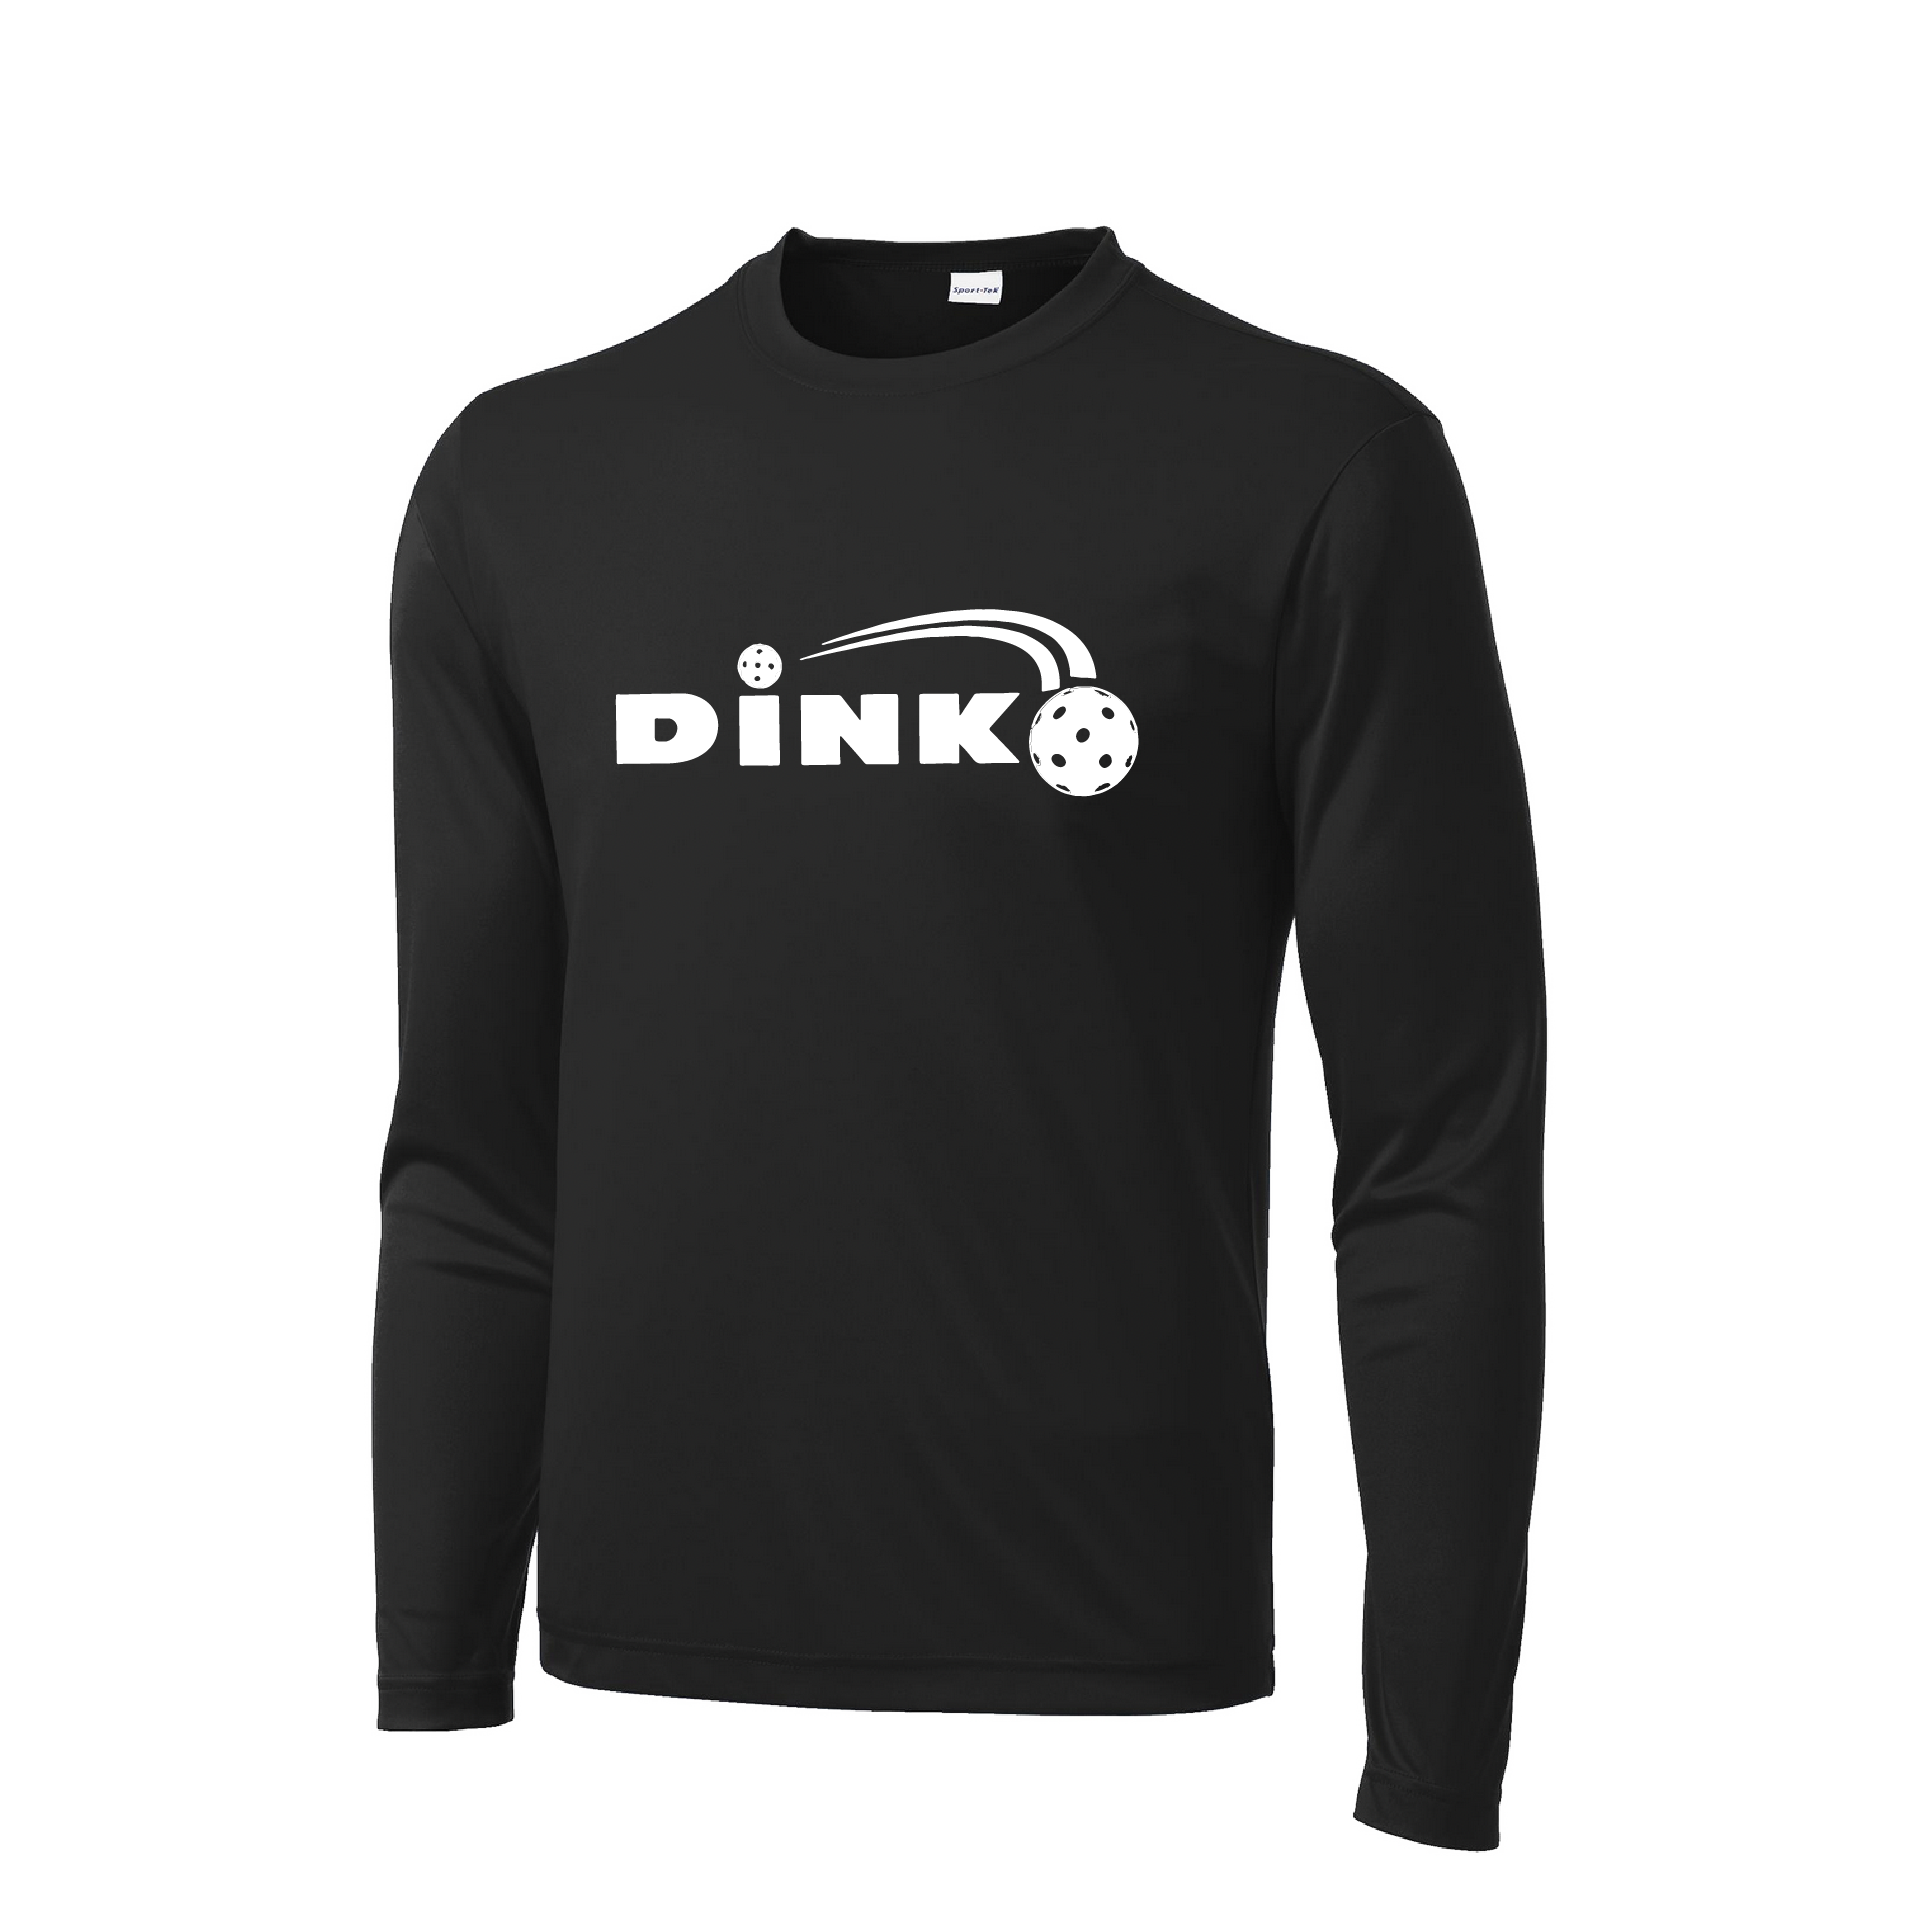 Pickelball Design: Dink  Men's Style: Long Sleeve  Shirts are lightweight, roomy and highly breathable. These moisture-wicking shirts are designed for athletic performance. They feature PosiCharge technology to lock in color and prevent logos from fading. Removable tag and set-in sleeves for comfort.